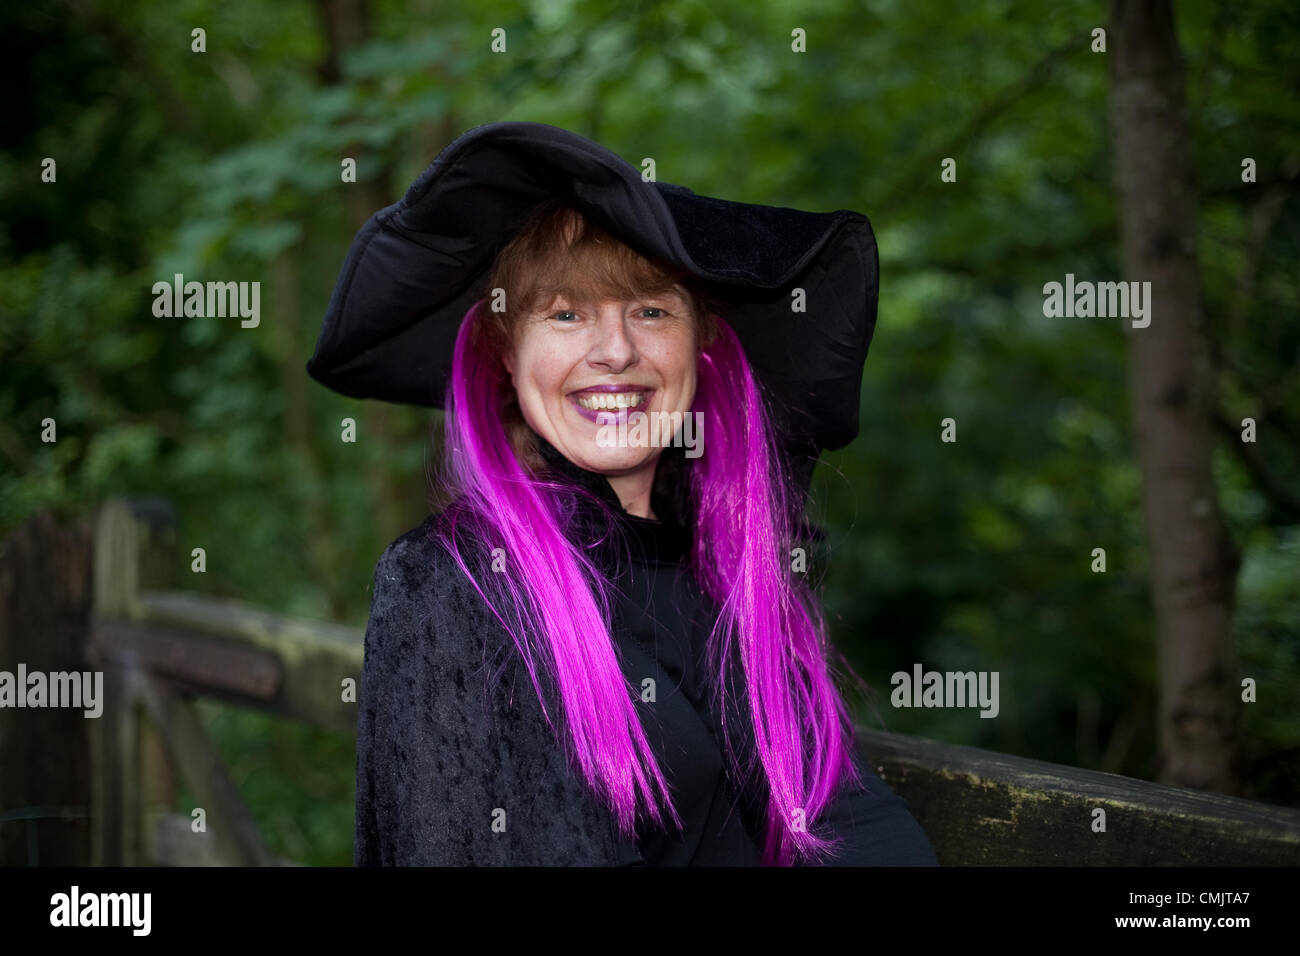 Lancashire, UK. Saturday, August 18th 2012.  Janice Quinliven at the Big Witch Event Barley, in the borough of Pendle, in Lancashire, England.  Official Guinness World Record attempt at “the largest gathering of people dressed as witches on Saturday 18th August, 2012 raising funds for Pendleside Hospice on the occasion of the 400th anniversary of the Pendle Witch Trials. Stock Photo